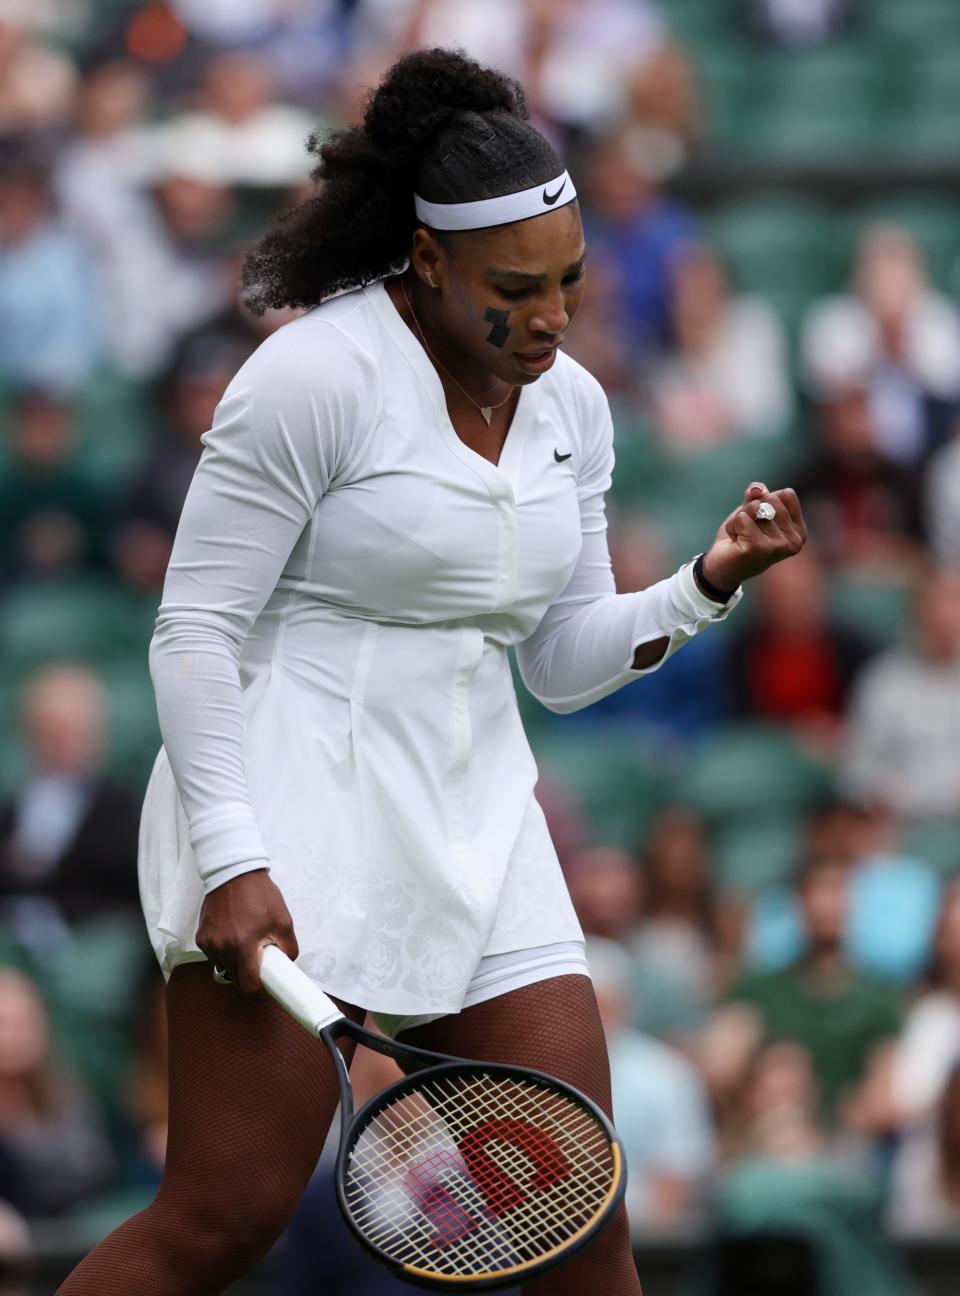 serena williams wimbledon fashion outfits and looks, LONDON, ENGLAND - JUNE 28: Serena Williams of United States celebrates a point against Harmony Tan of France during their Women's Singles First Round Match on day two of The Championships Wimbledon 2022 at All England Lawn Tennis and Croquet Club on June 28, 2022 in London, England. (Photo by Clive Brunskill/Getty Images)